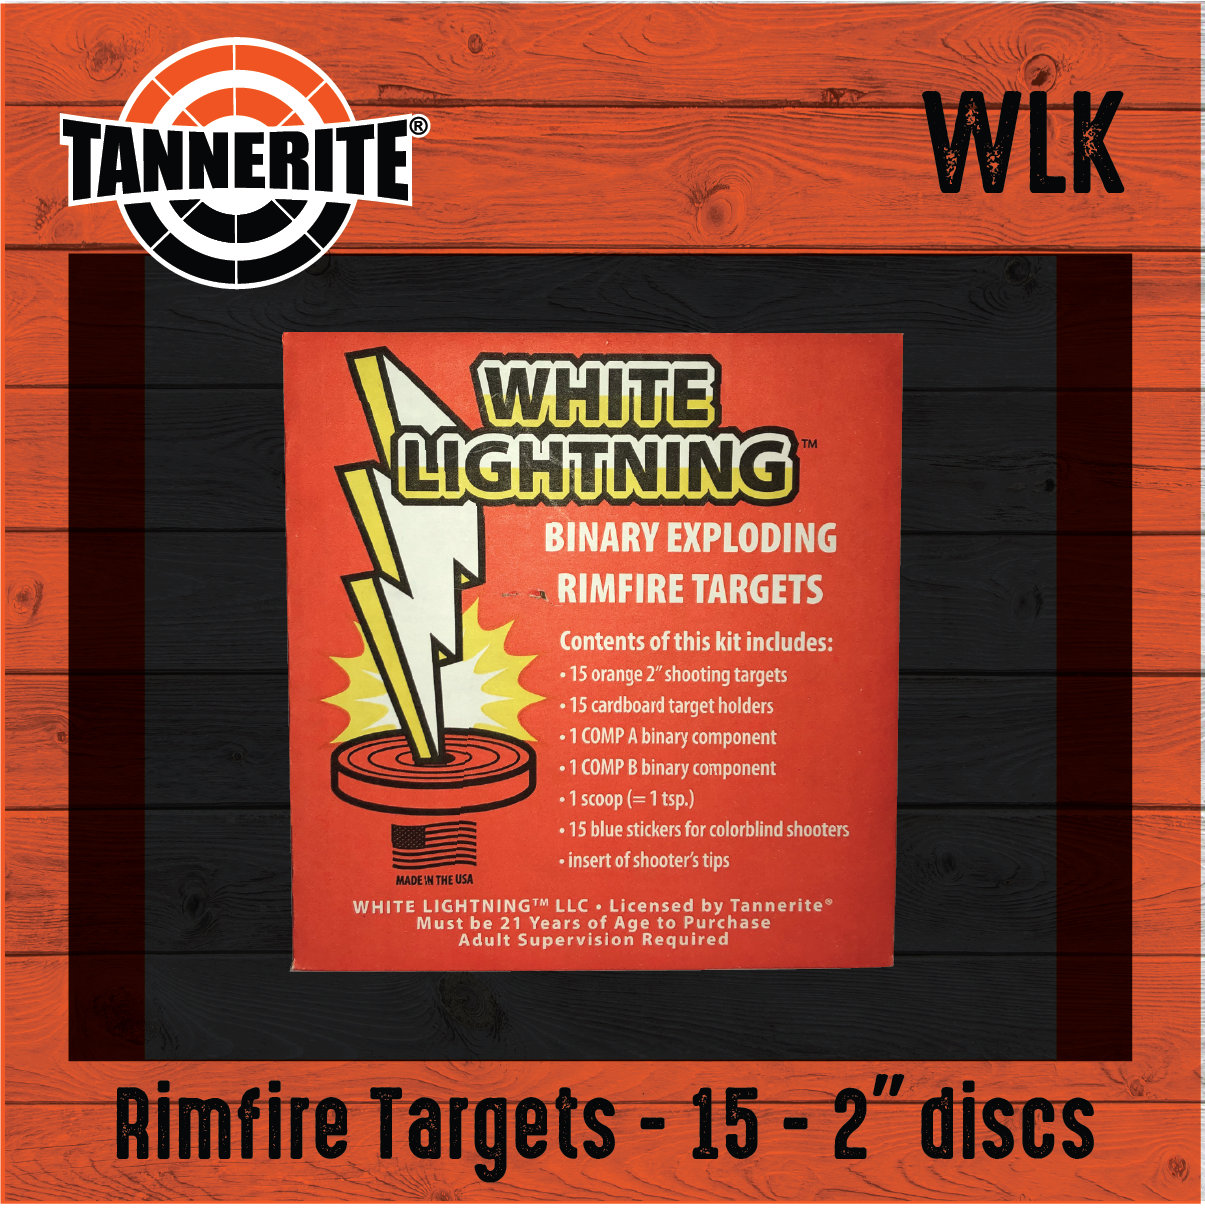 Exploding Targets: shooting aid or a 'bomb kit for dummies?